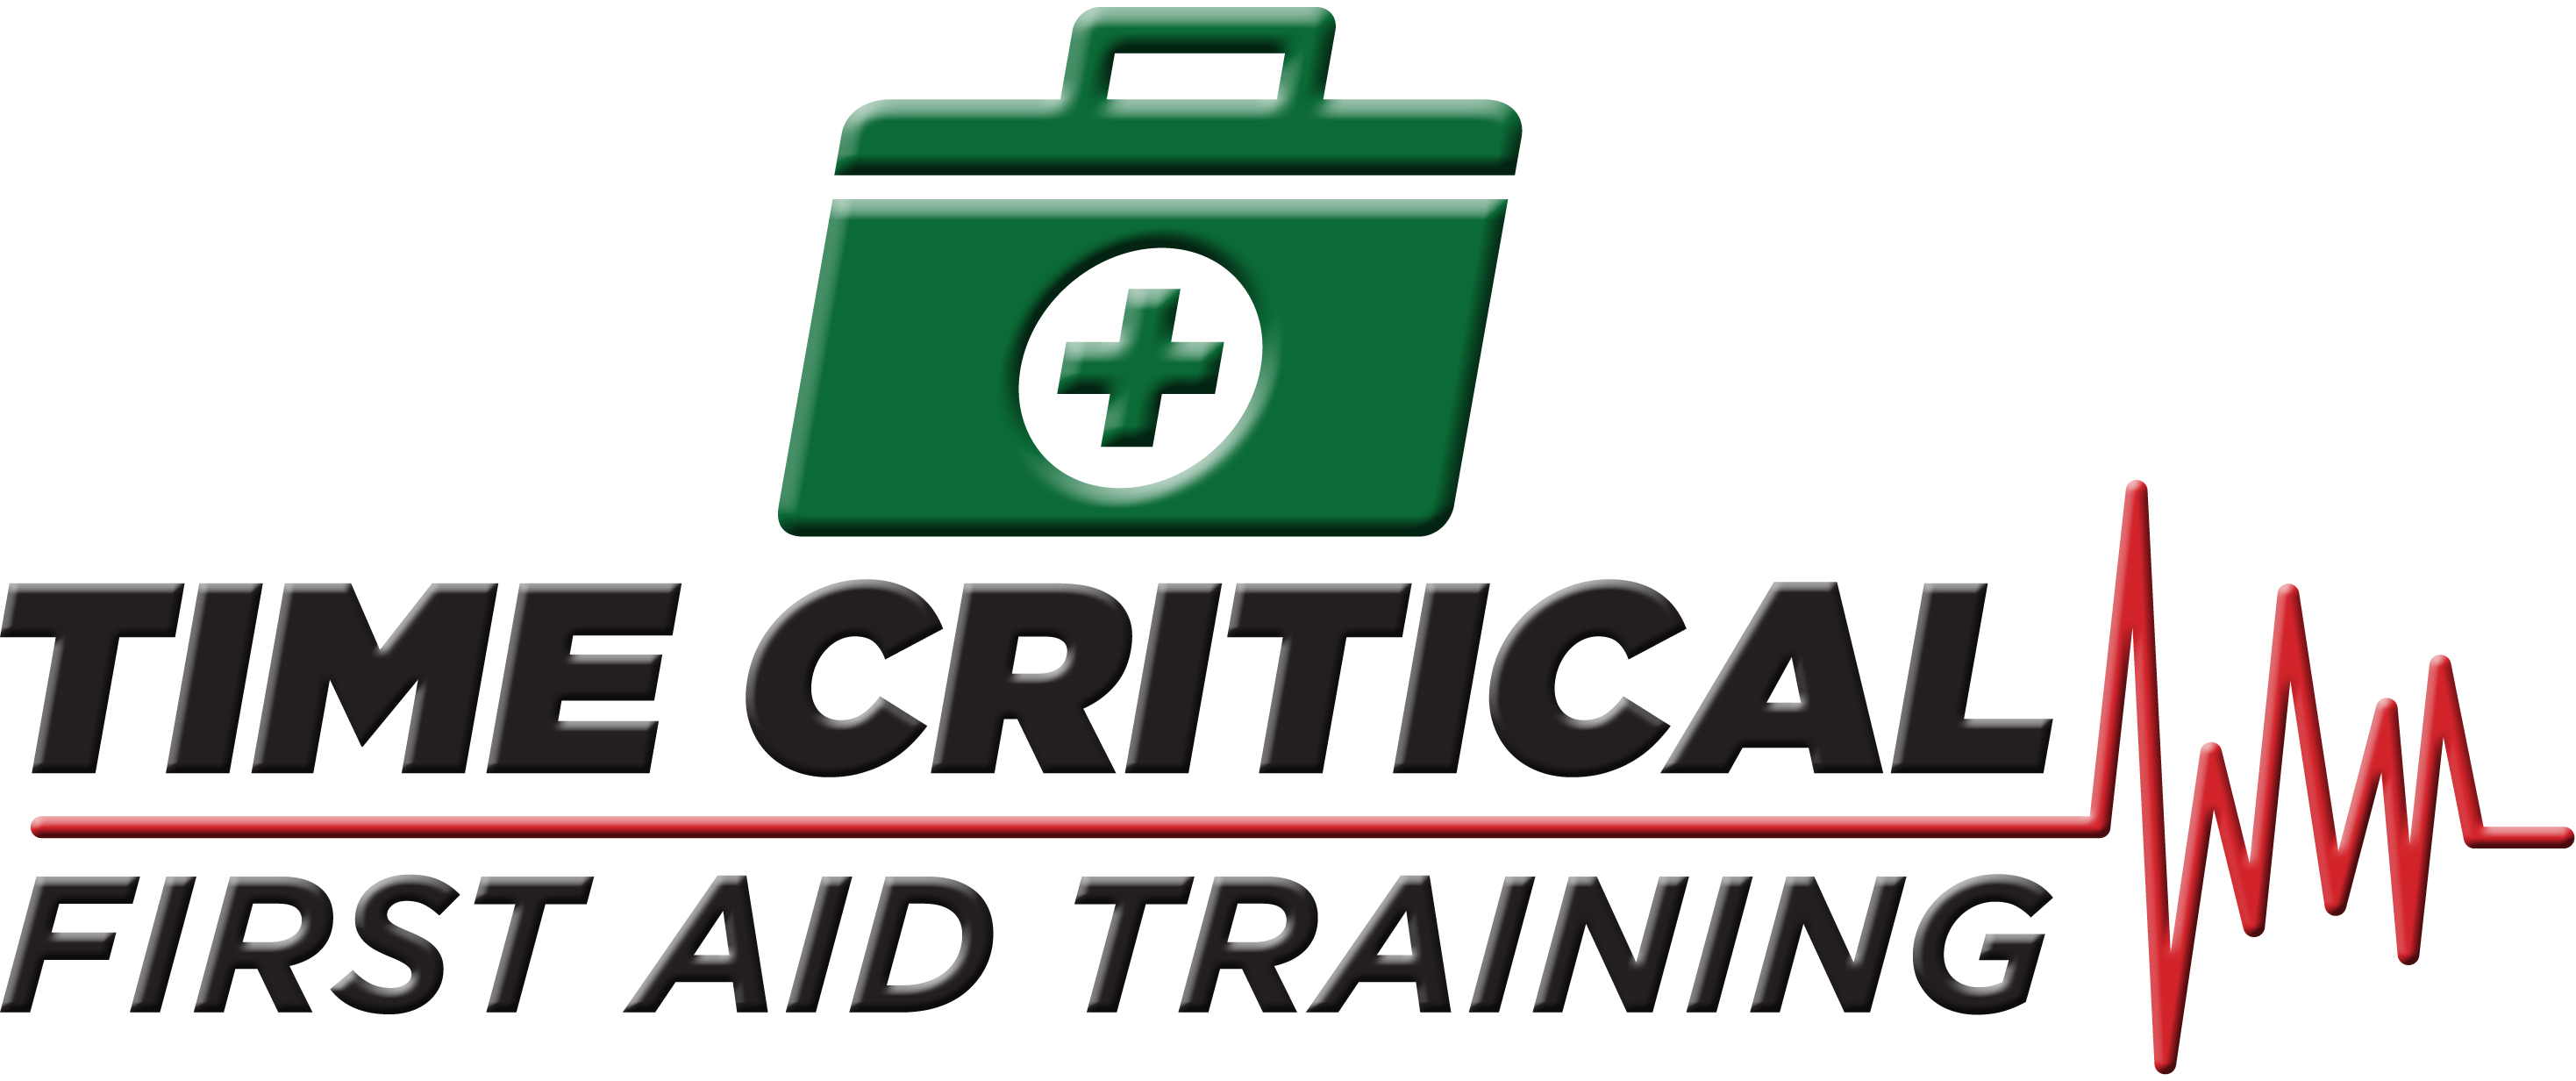 Time Critical First Aid Training